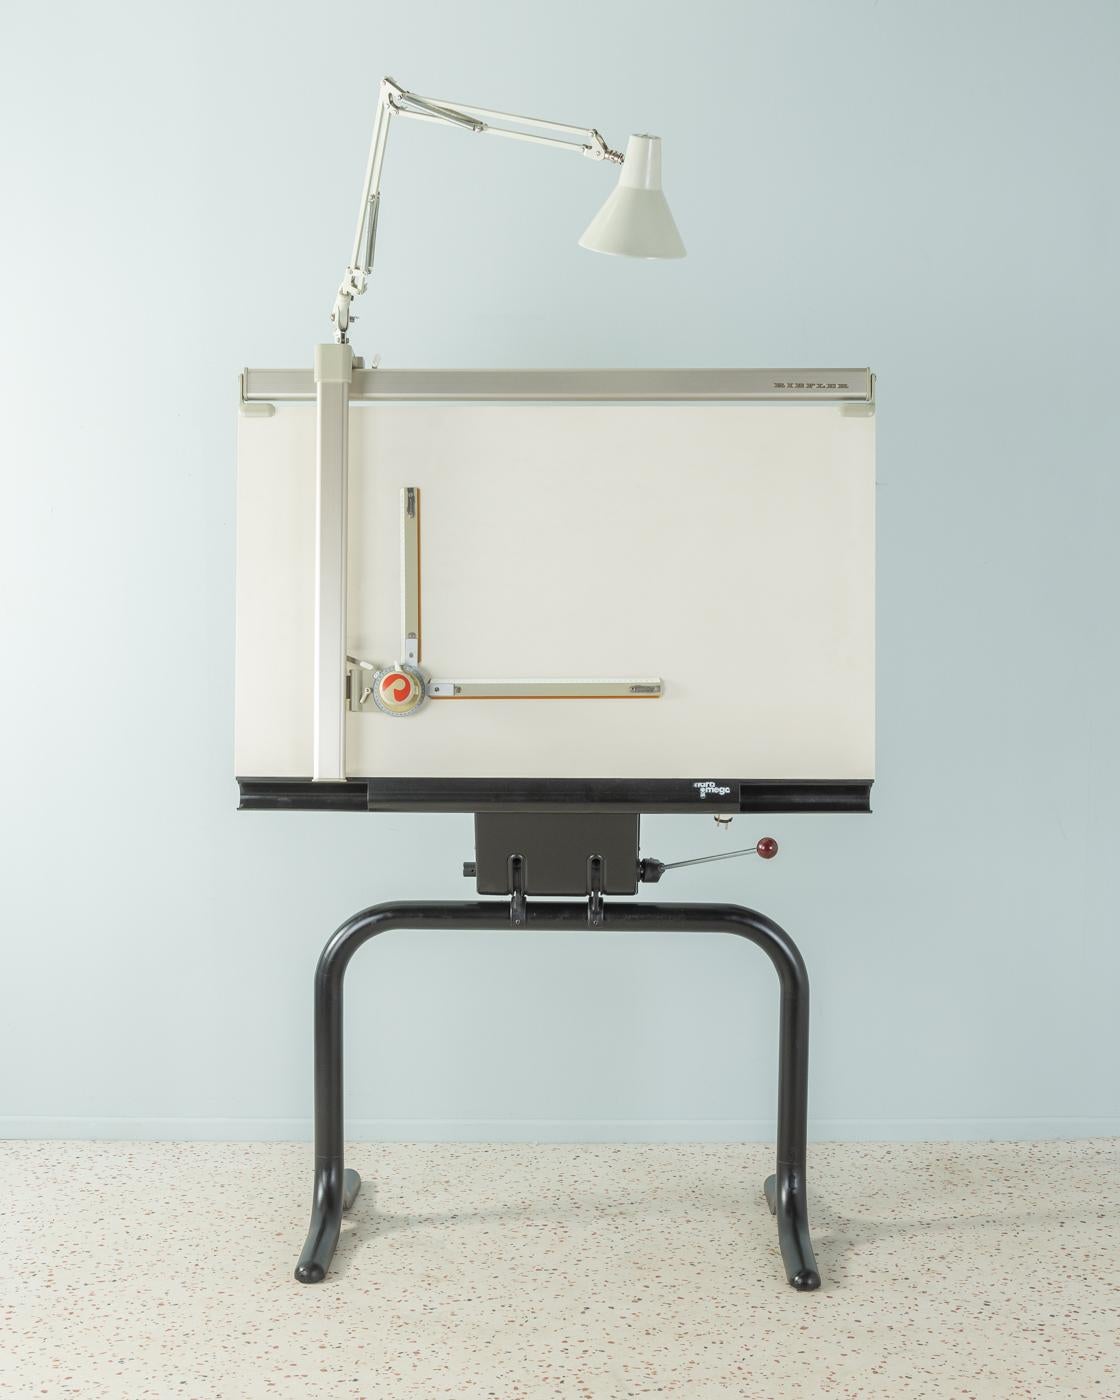 Rare architect drawing table model Maramega from 1979 according to a design by Popp. Very high quality construction of black painted steel, a drawing table with precision drawing system from Riefler and the original lamp. The frame is height